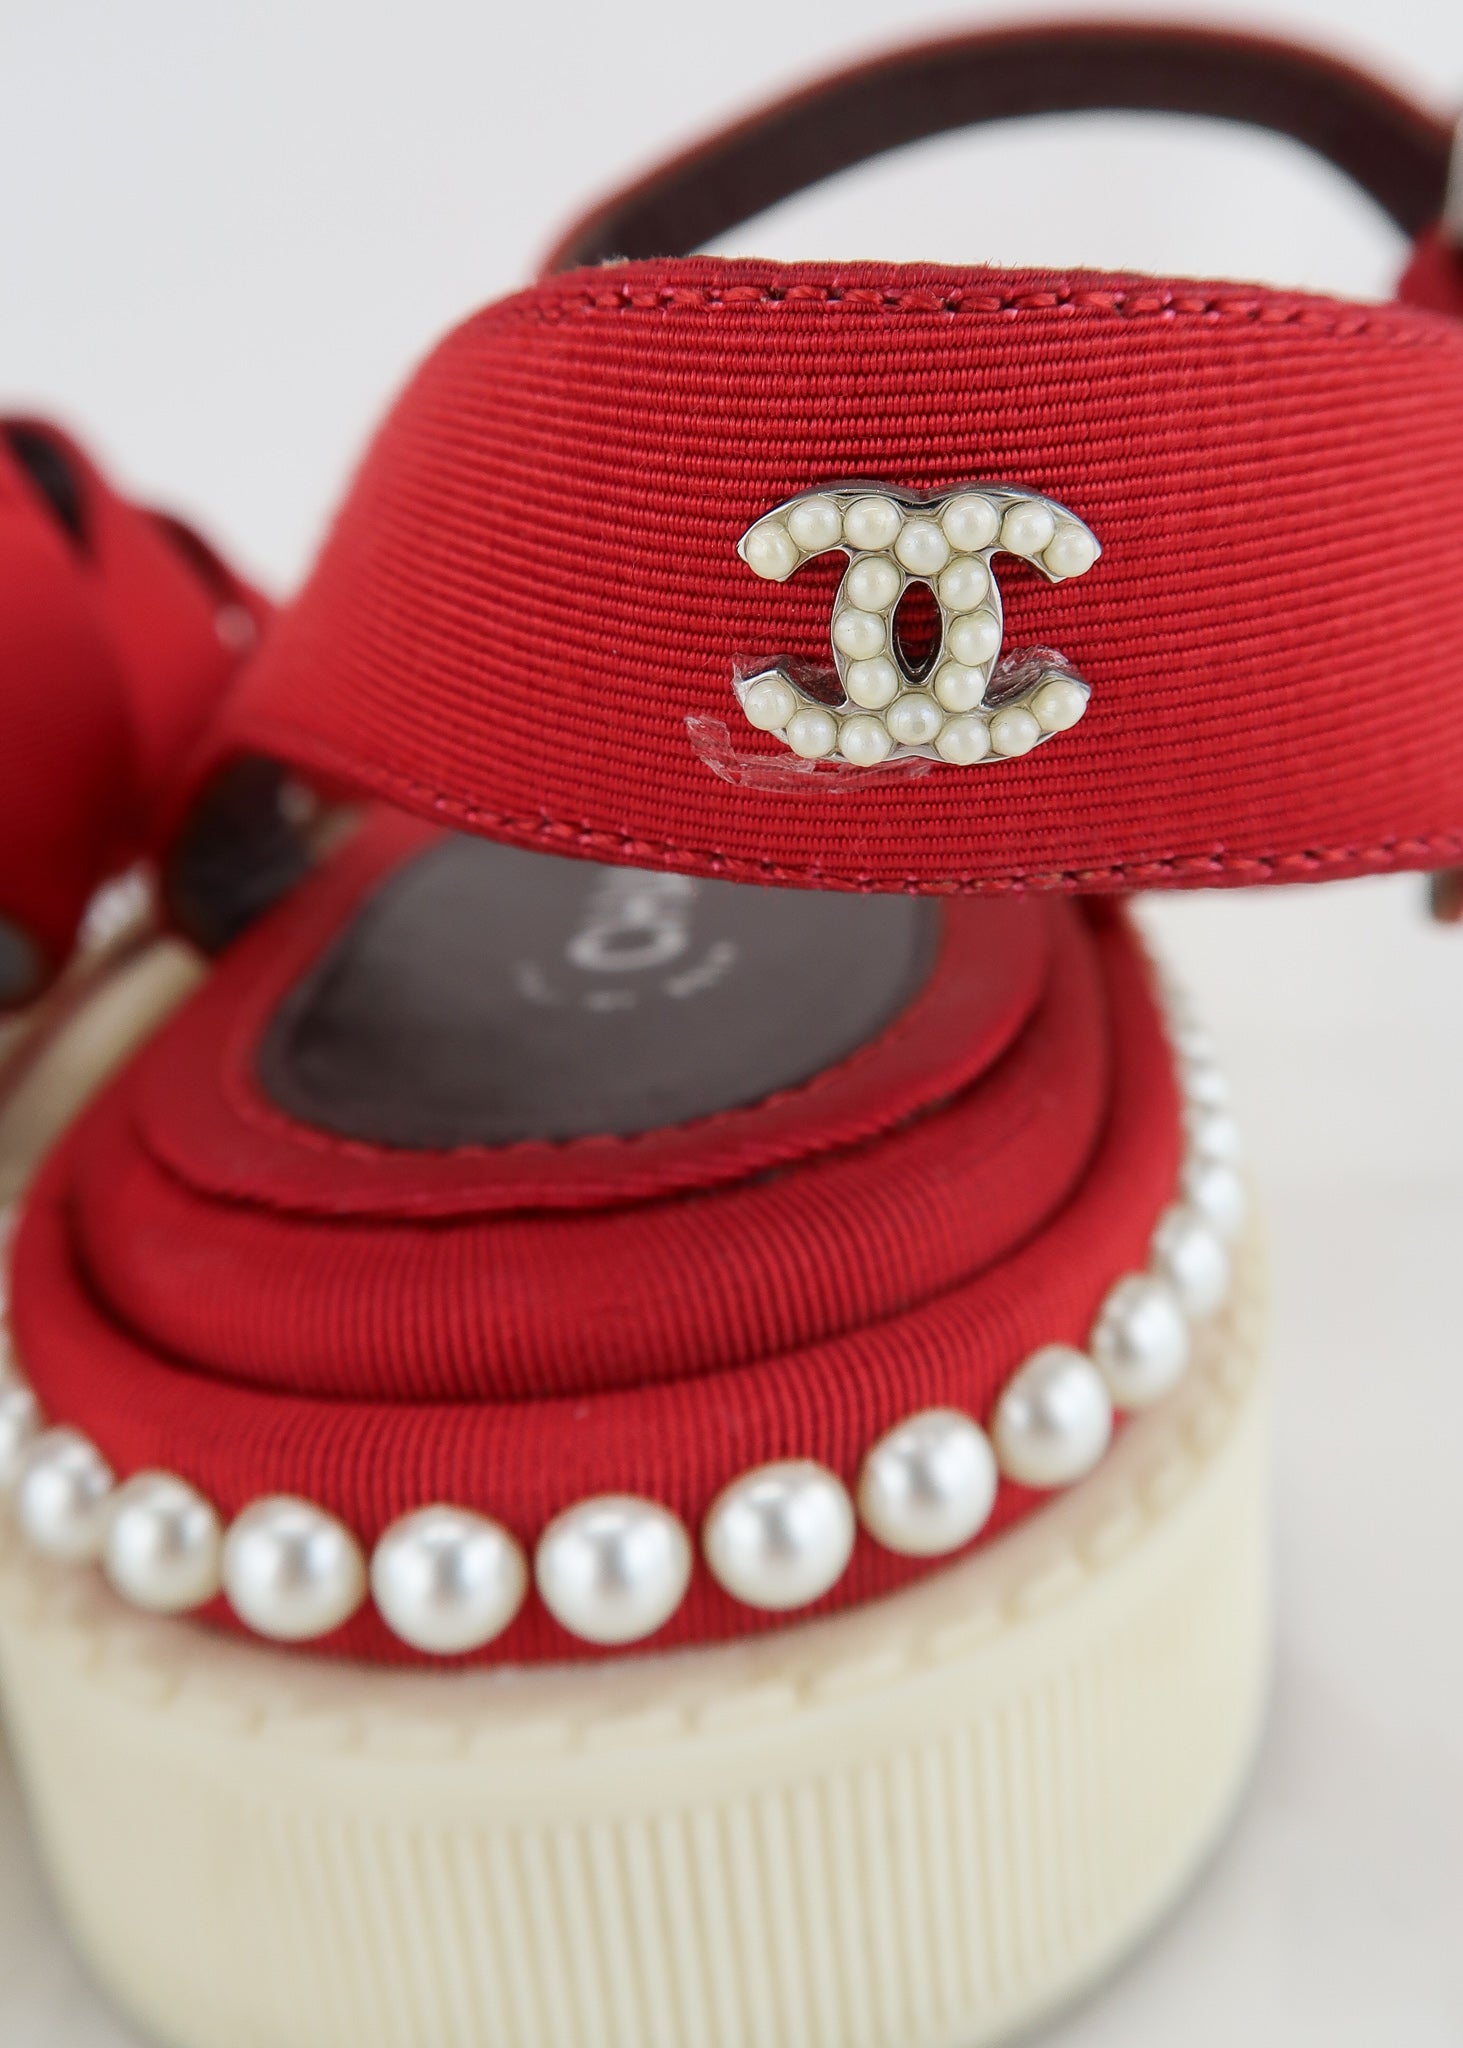 Mees Ruby Malanaphy-Doorenbosch Sandals Chanel sandal pearls $1,250.00 